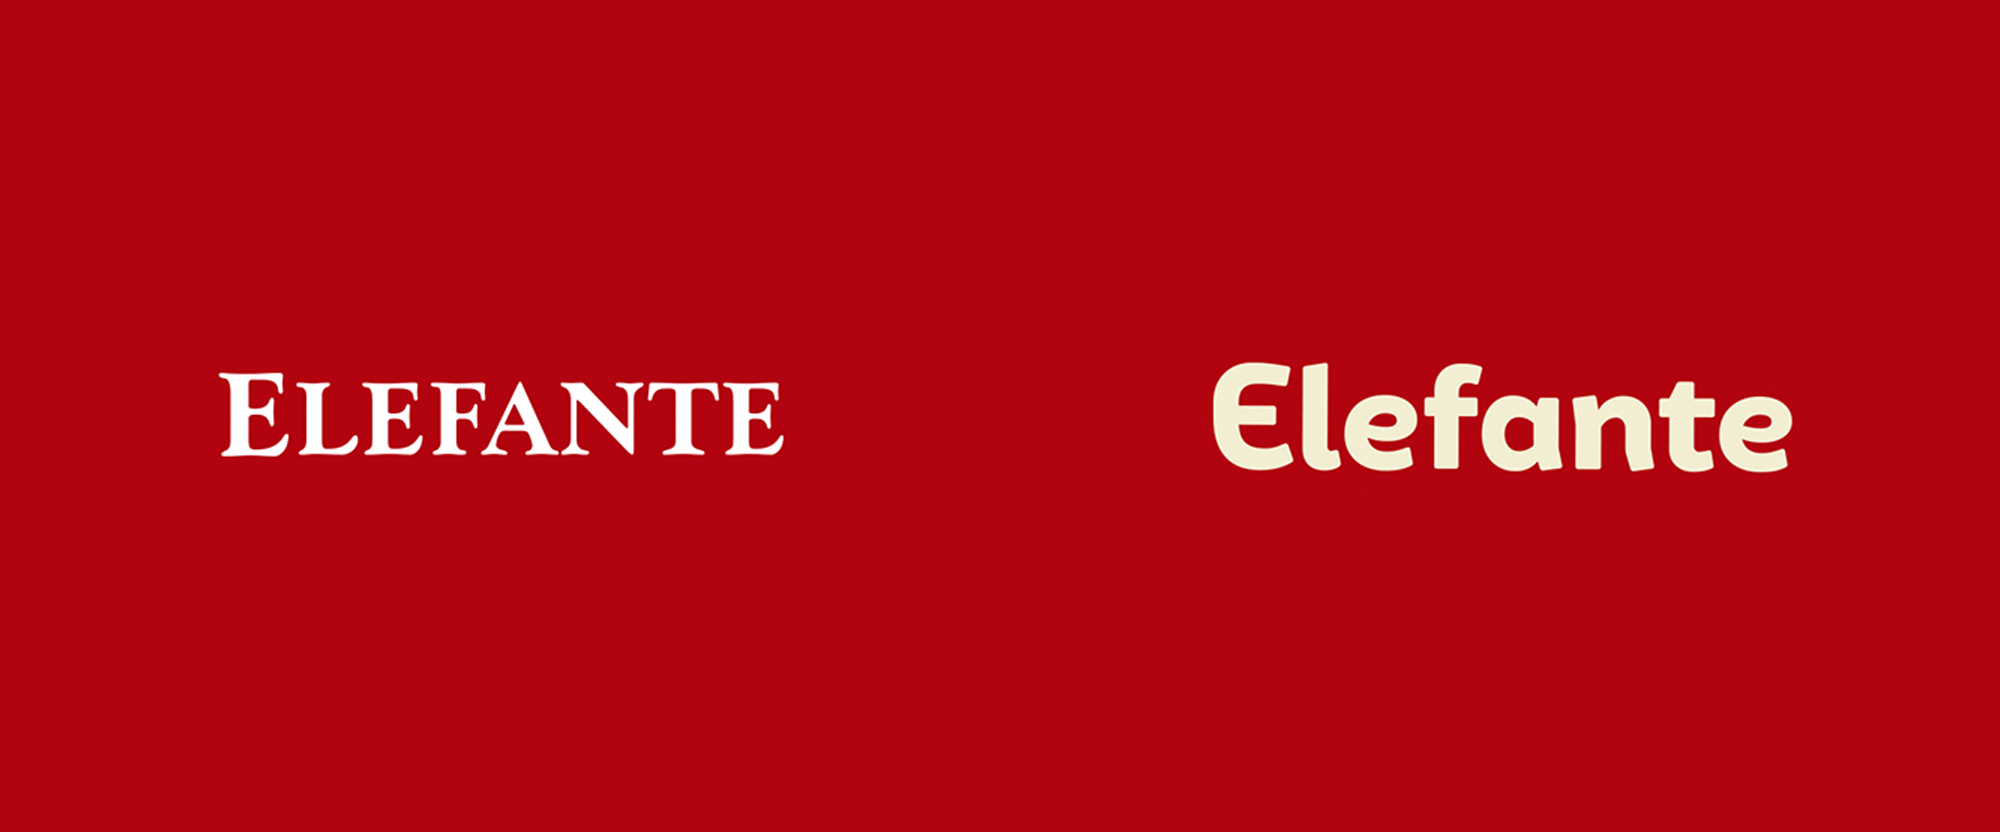 New Logo, Identity, and Packaging for Elefante by Interbrand